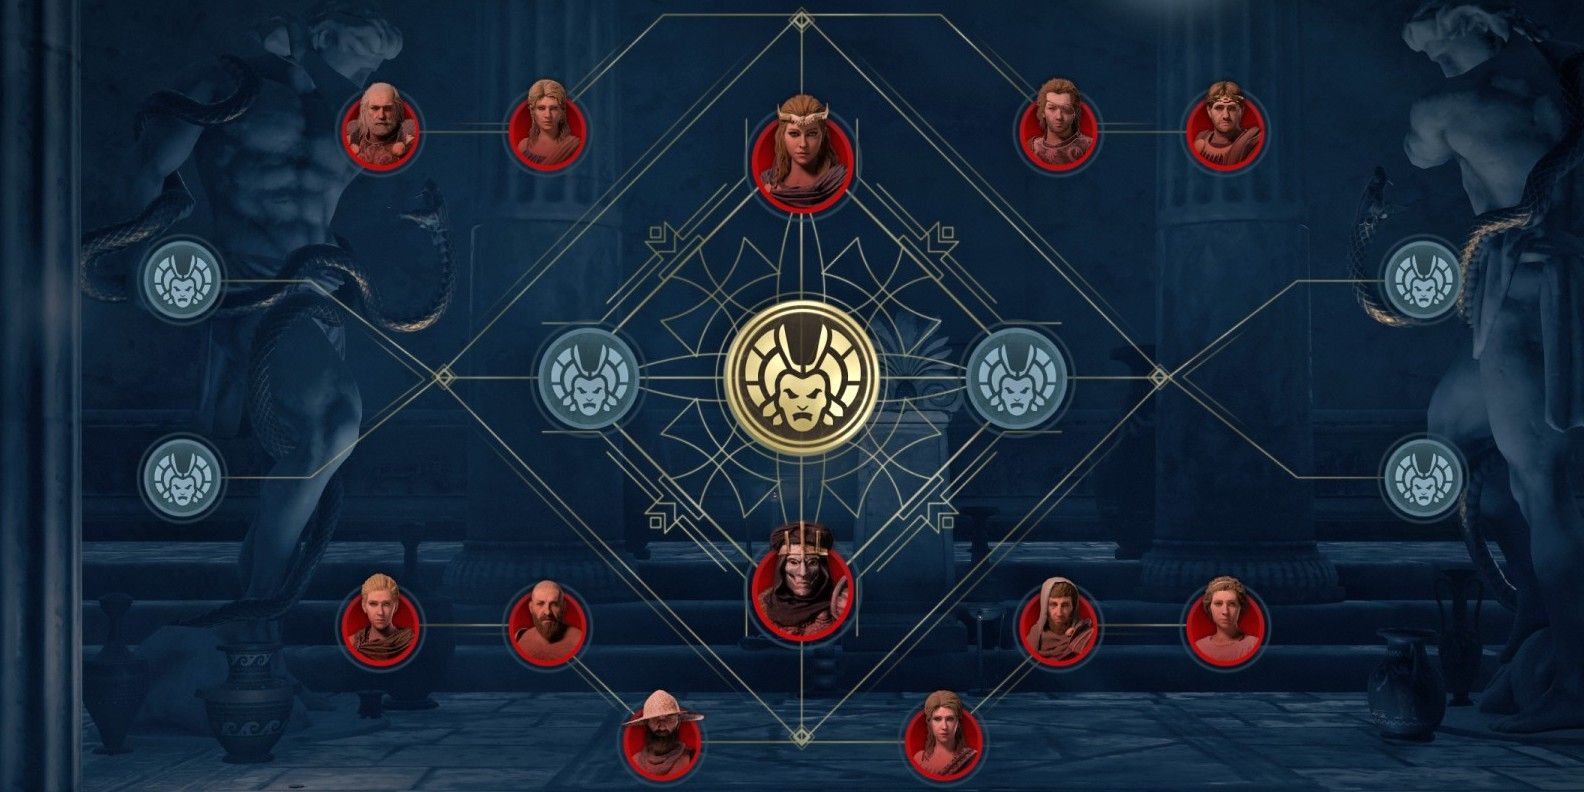 Order Of Dominion targets in Assassin's Creed Odyssey Legacy of the First Blade